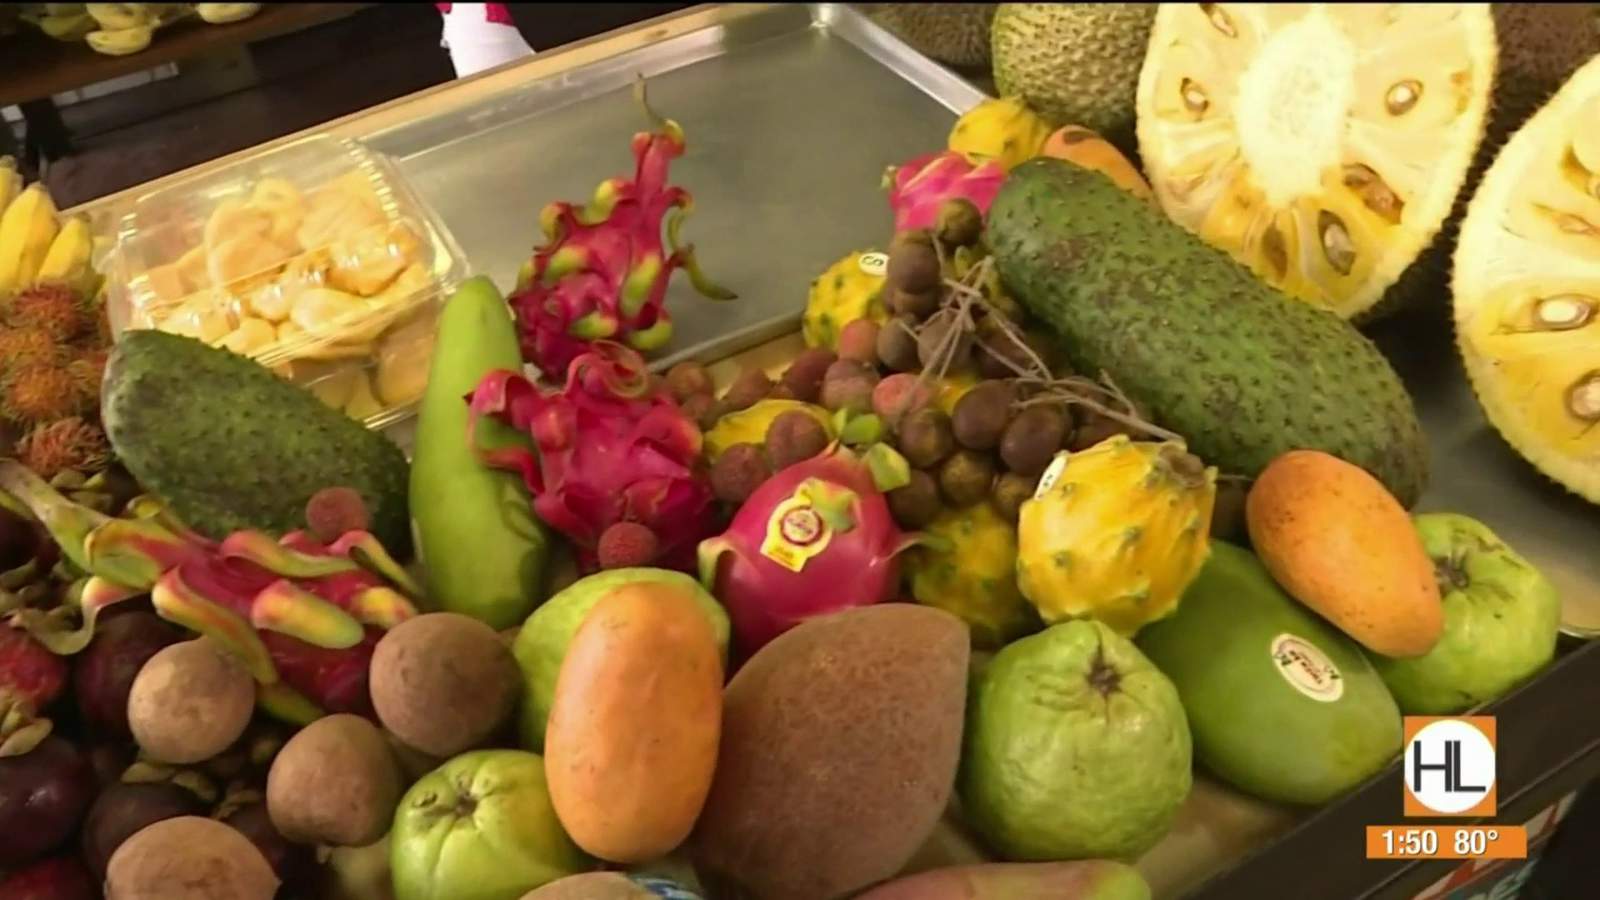 Linda’s Tropical Fruits will give you a taste of the tropics right here in Houston | HOUSTON LIFE | KPRC 2